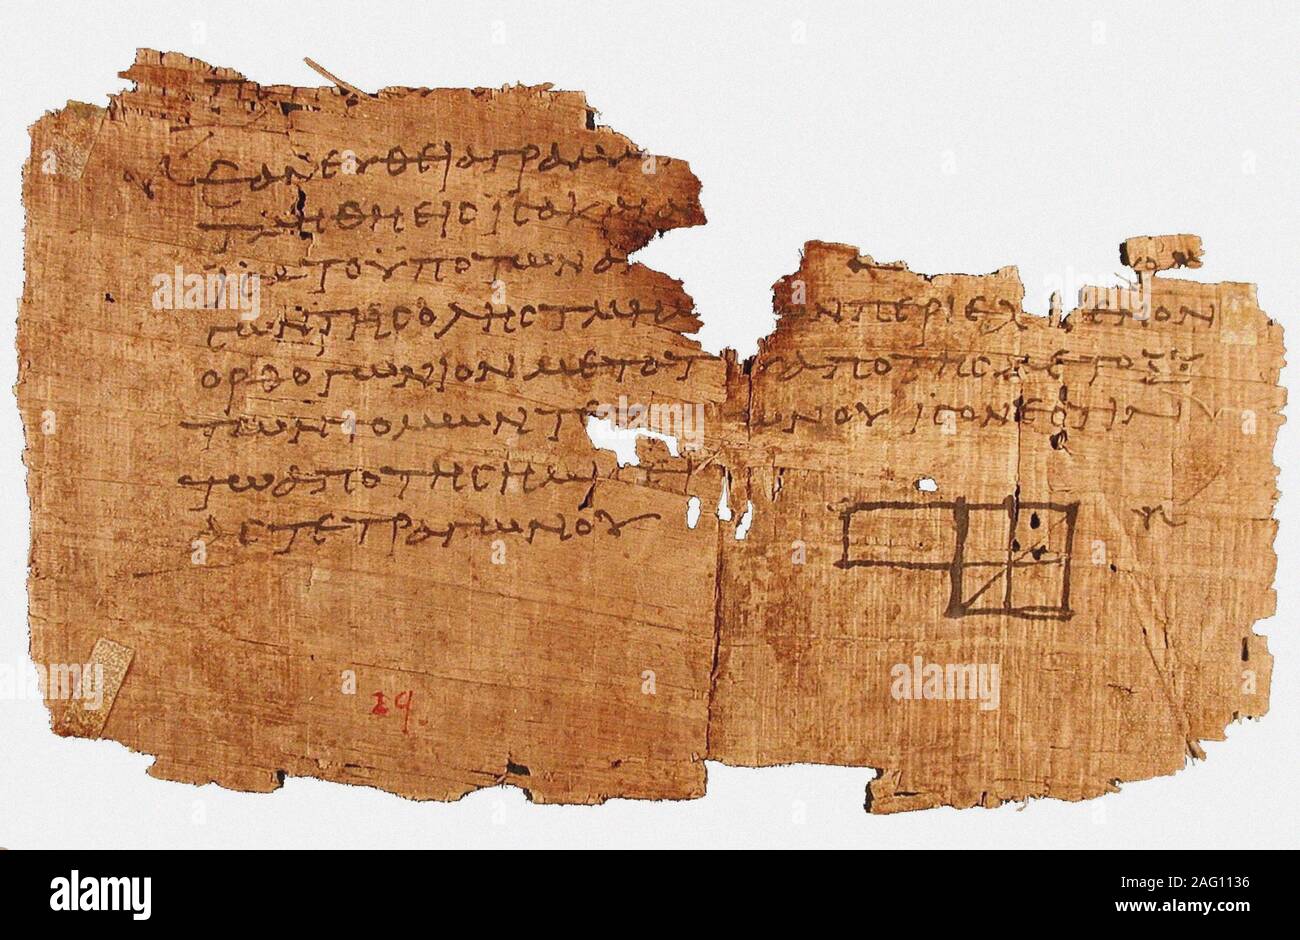 Papyrus Oxyrhynchus 29, with a fragment of Euclid's Elements, Between 75 and 125 AD. Found in the Collection of Penn Museum. Stock Photo